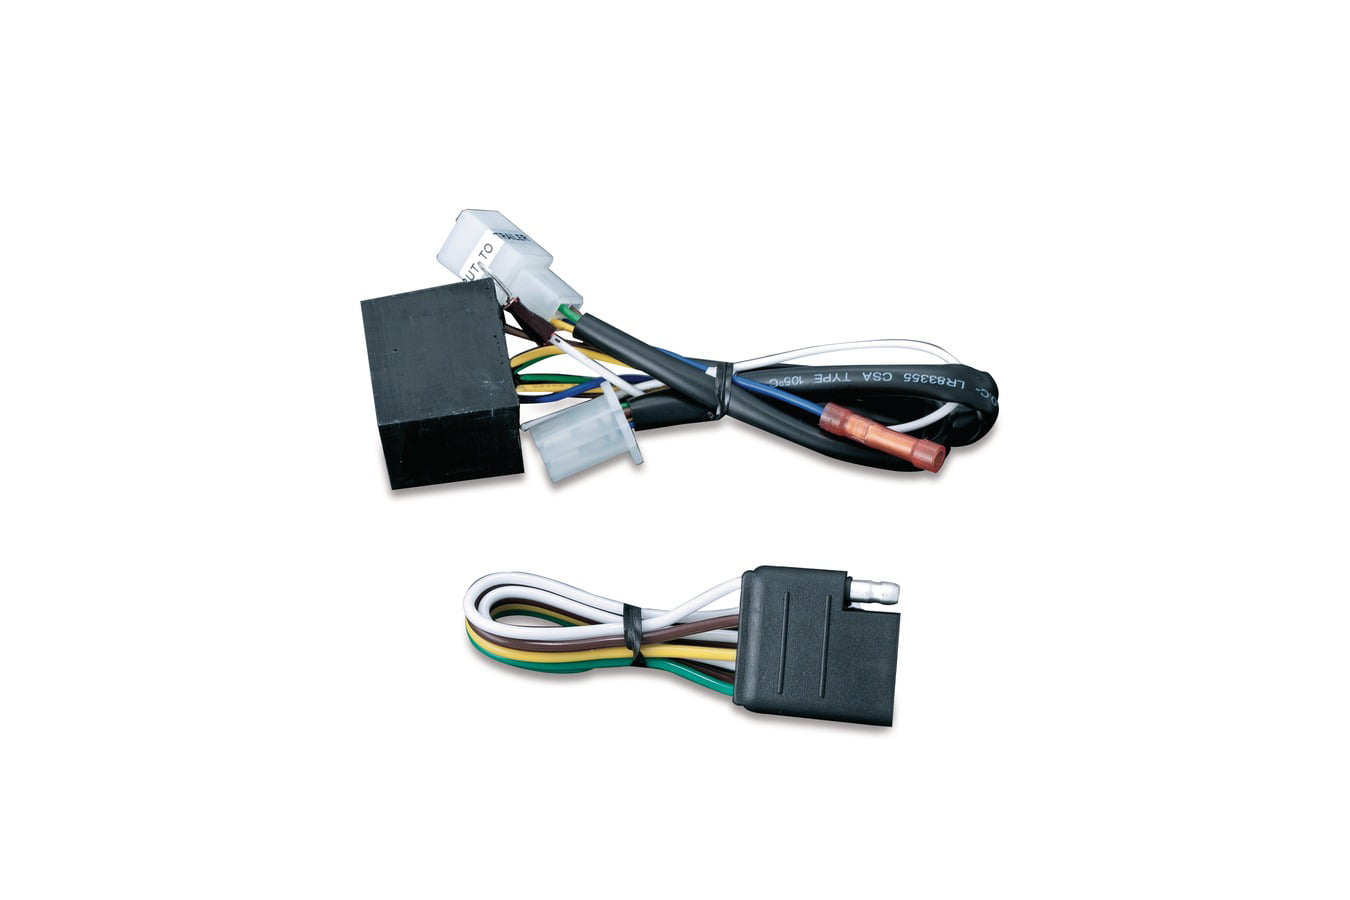 Kuryakyn 7675 Motorcycle Accessory: 5 to 4 Wire Converter with 4-Pin Flat  Connector for Plug & Play Trailer Wiring Harness, Universal Fit -  Walmart.com 6 Pin Wiring Diagram Walmart